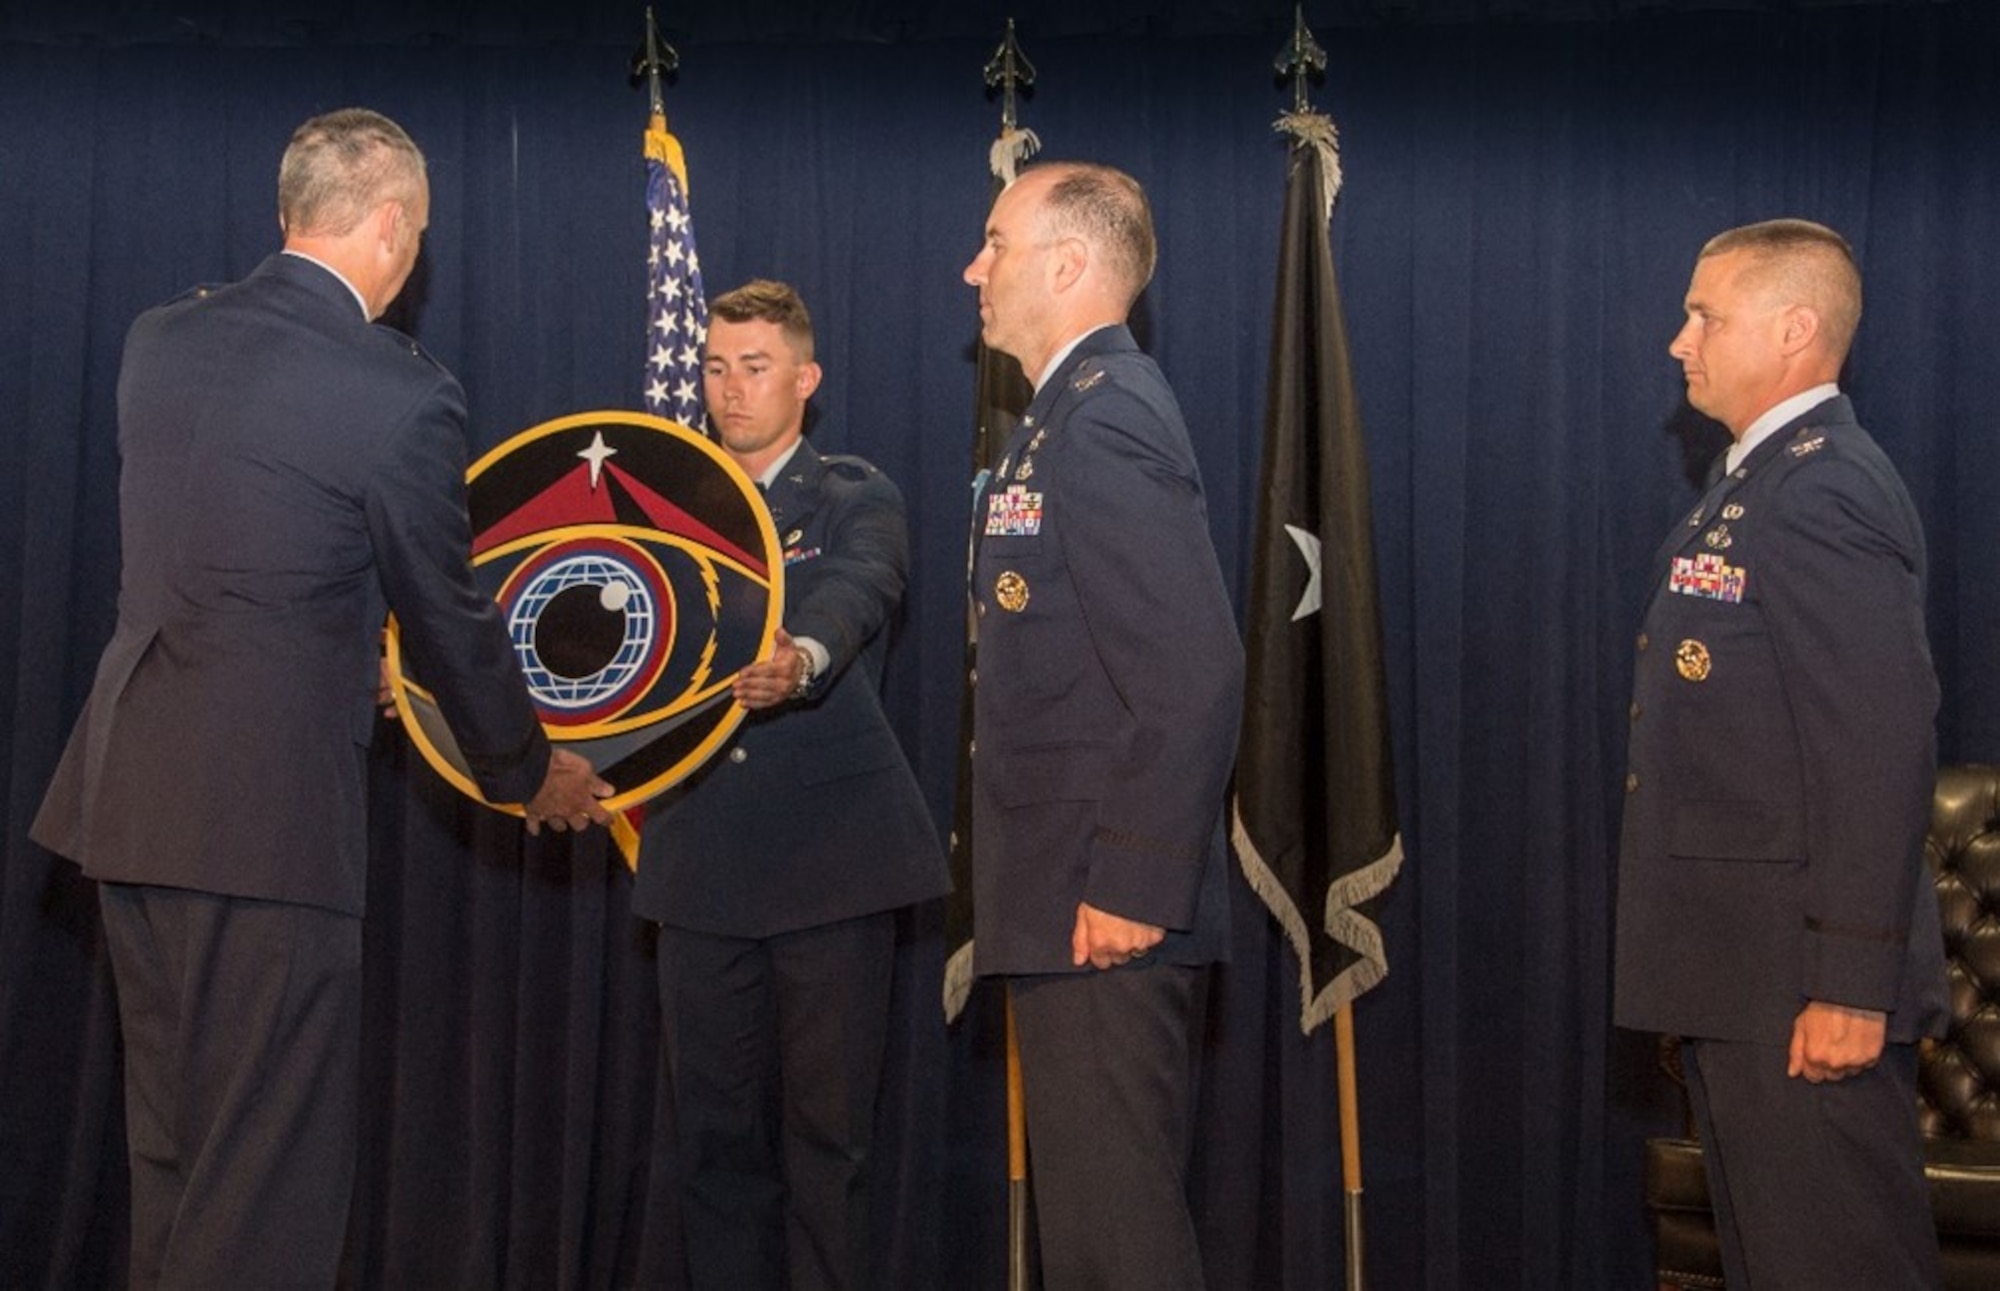 Brig. Gen. Jason Cothern, Space Systems Command, deputy commander, officiates a change of leadership ceremony, where outgoing program executive officer, Col. Brian Denaro relinquishes leadership of SSC’s Space Sensing Program Executive Office to Col. Robert Davis, at SSC headquarters, Los Angeles Air Force Base, California, June 8, 2023. Space Sensing is one of five SSC program executive offices and is responsible for delivering space-based missile warning, tracking, and defense capabilities; space-based environmental monitoring (SBEM) capabilities; and other tactical intelligence, surveillance, and reconnaissance capabilities, ensuring end-to-end mission integration. (U.S. Space Force photo by Van De Ha)